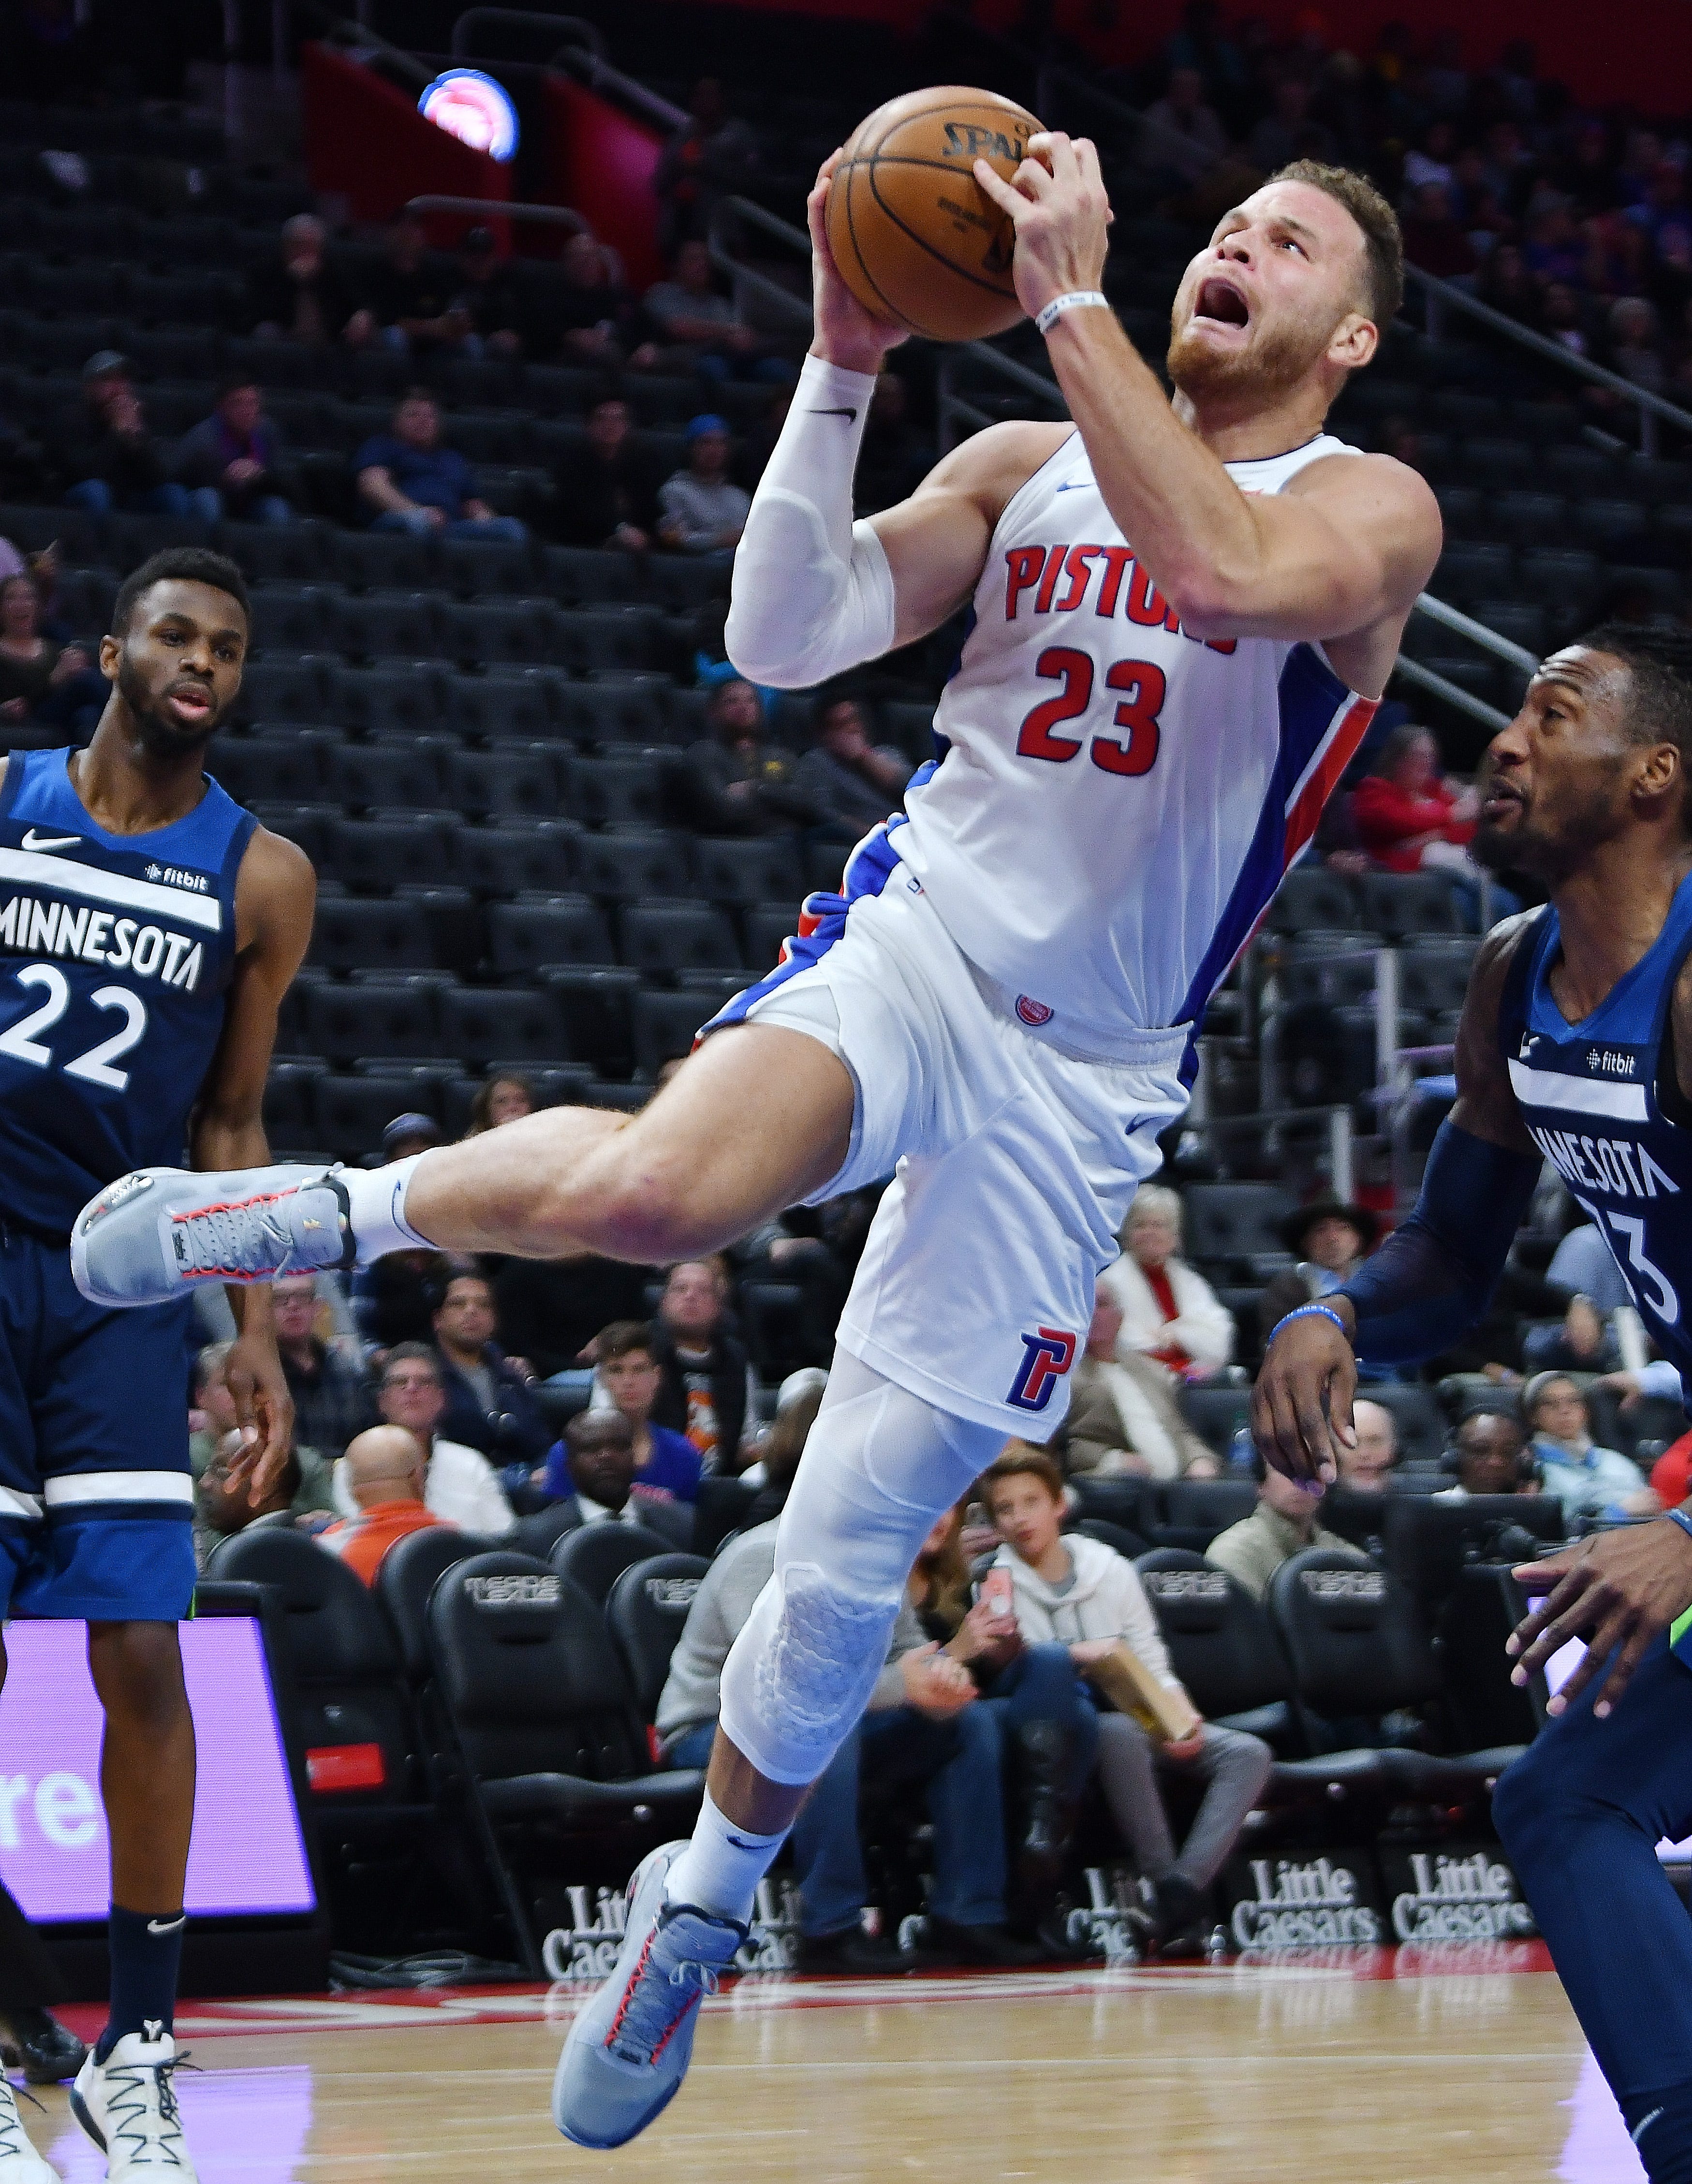 Pistons' Blake Griffin scores over Timberwolves' Robert Covington in the second quarter. Griffin had 19 points and seven rebounds.